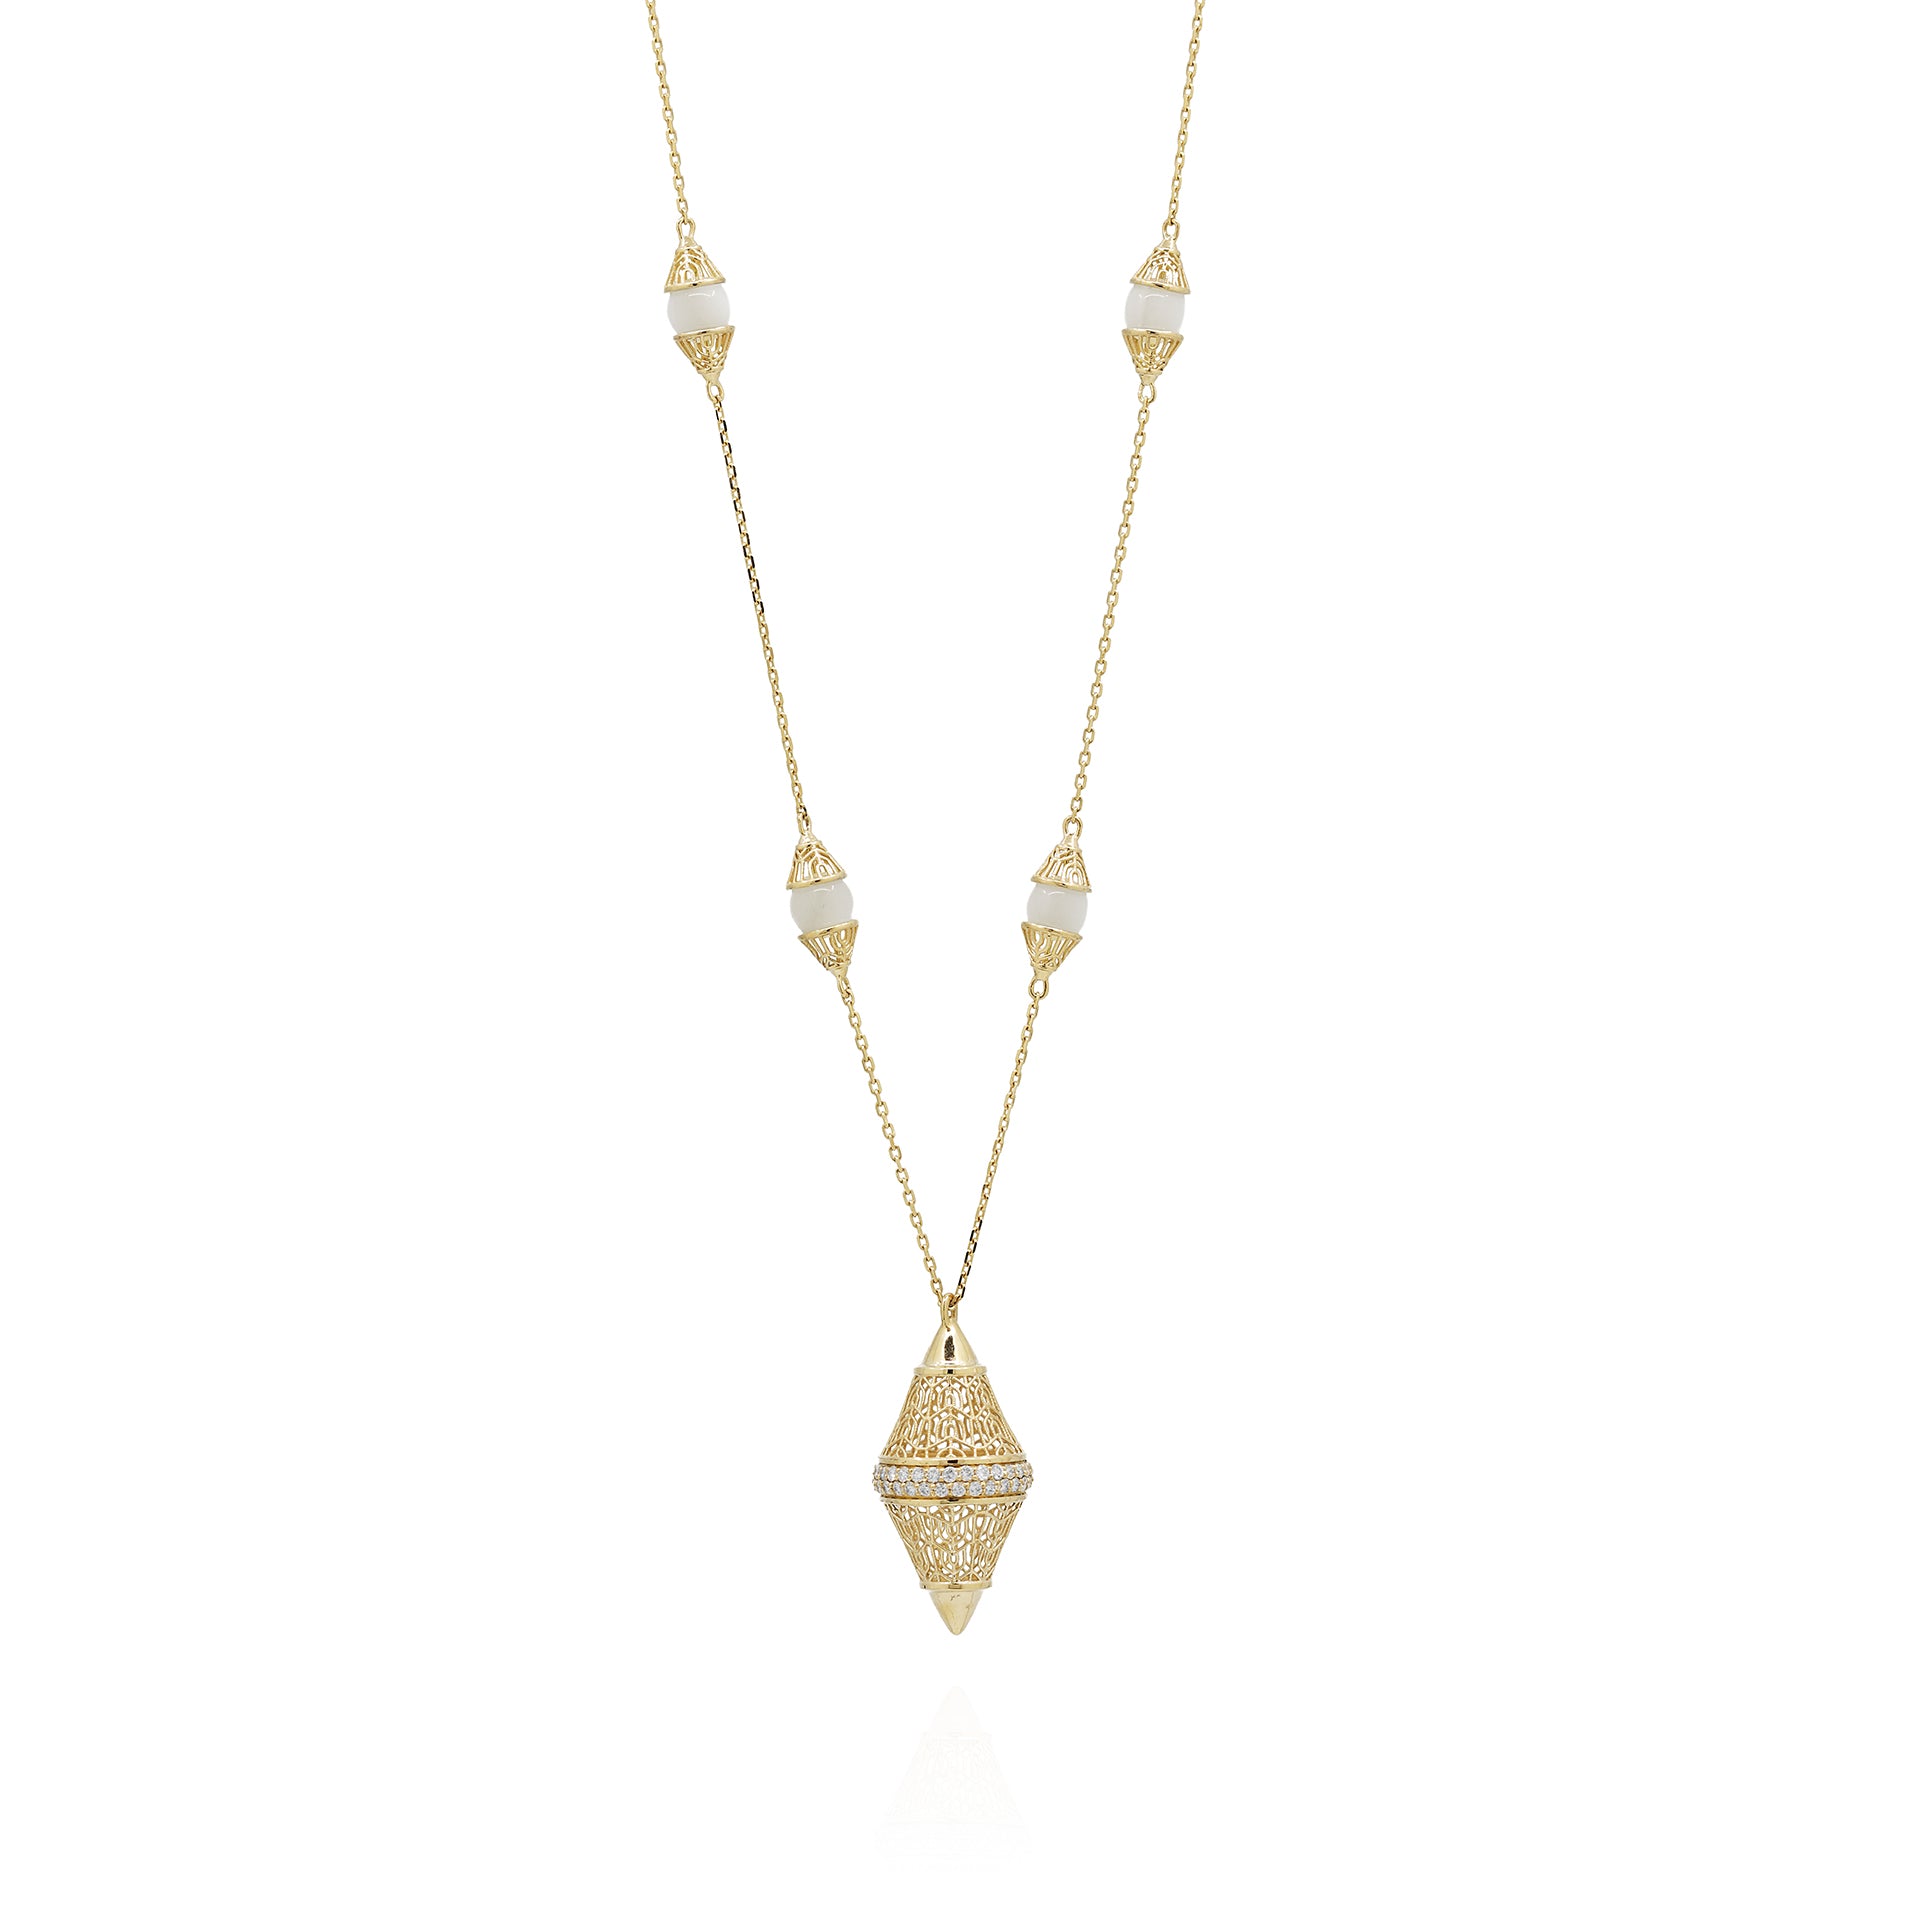 18k Yellow Gold Large Pendant Necklace with Mother of Pearl and Diamonds